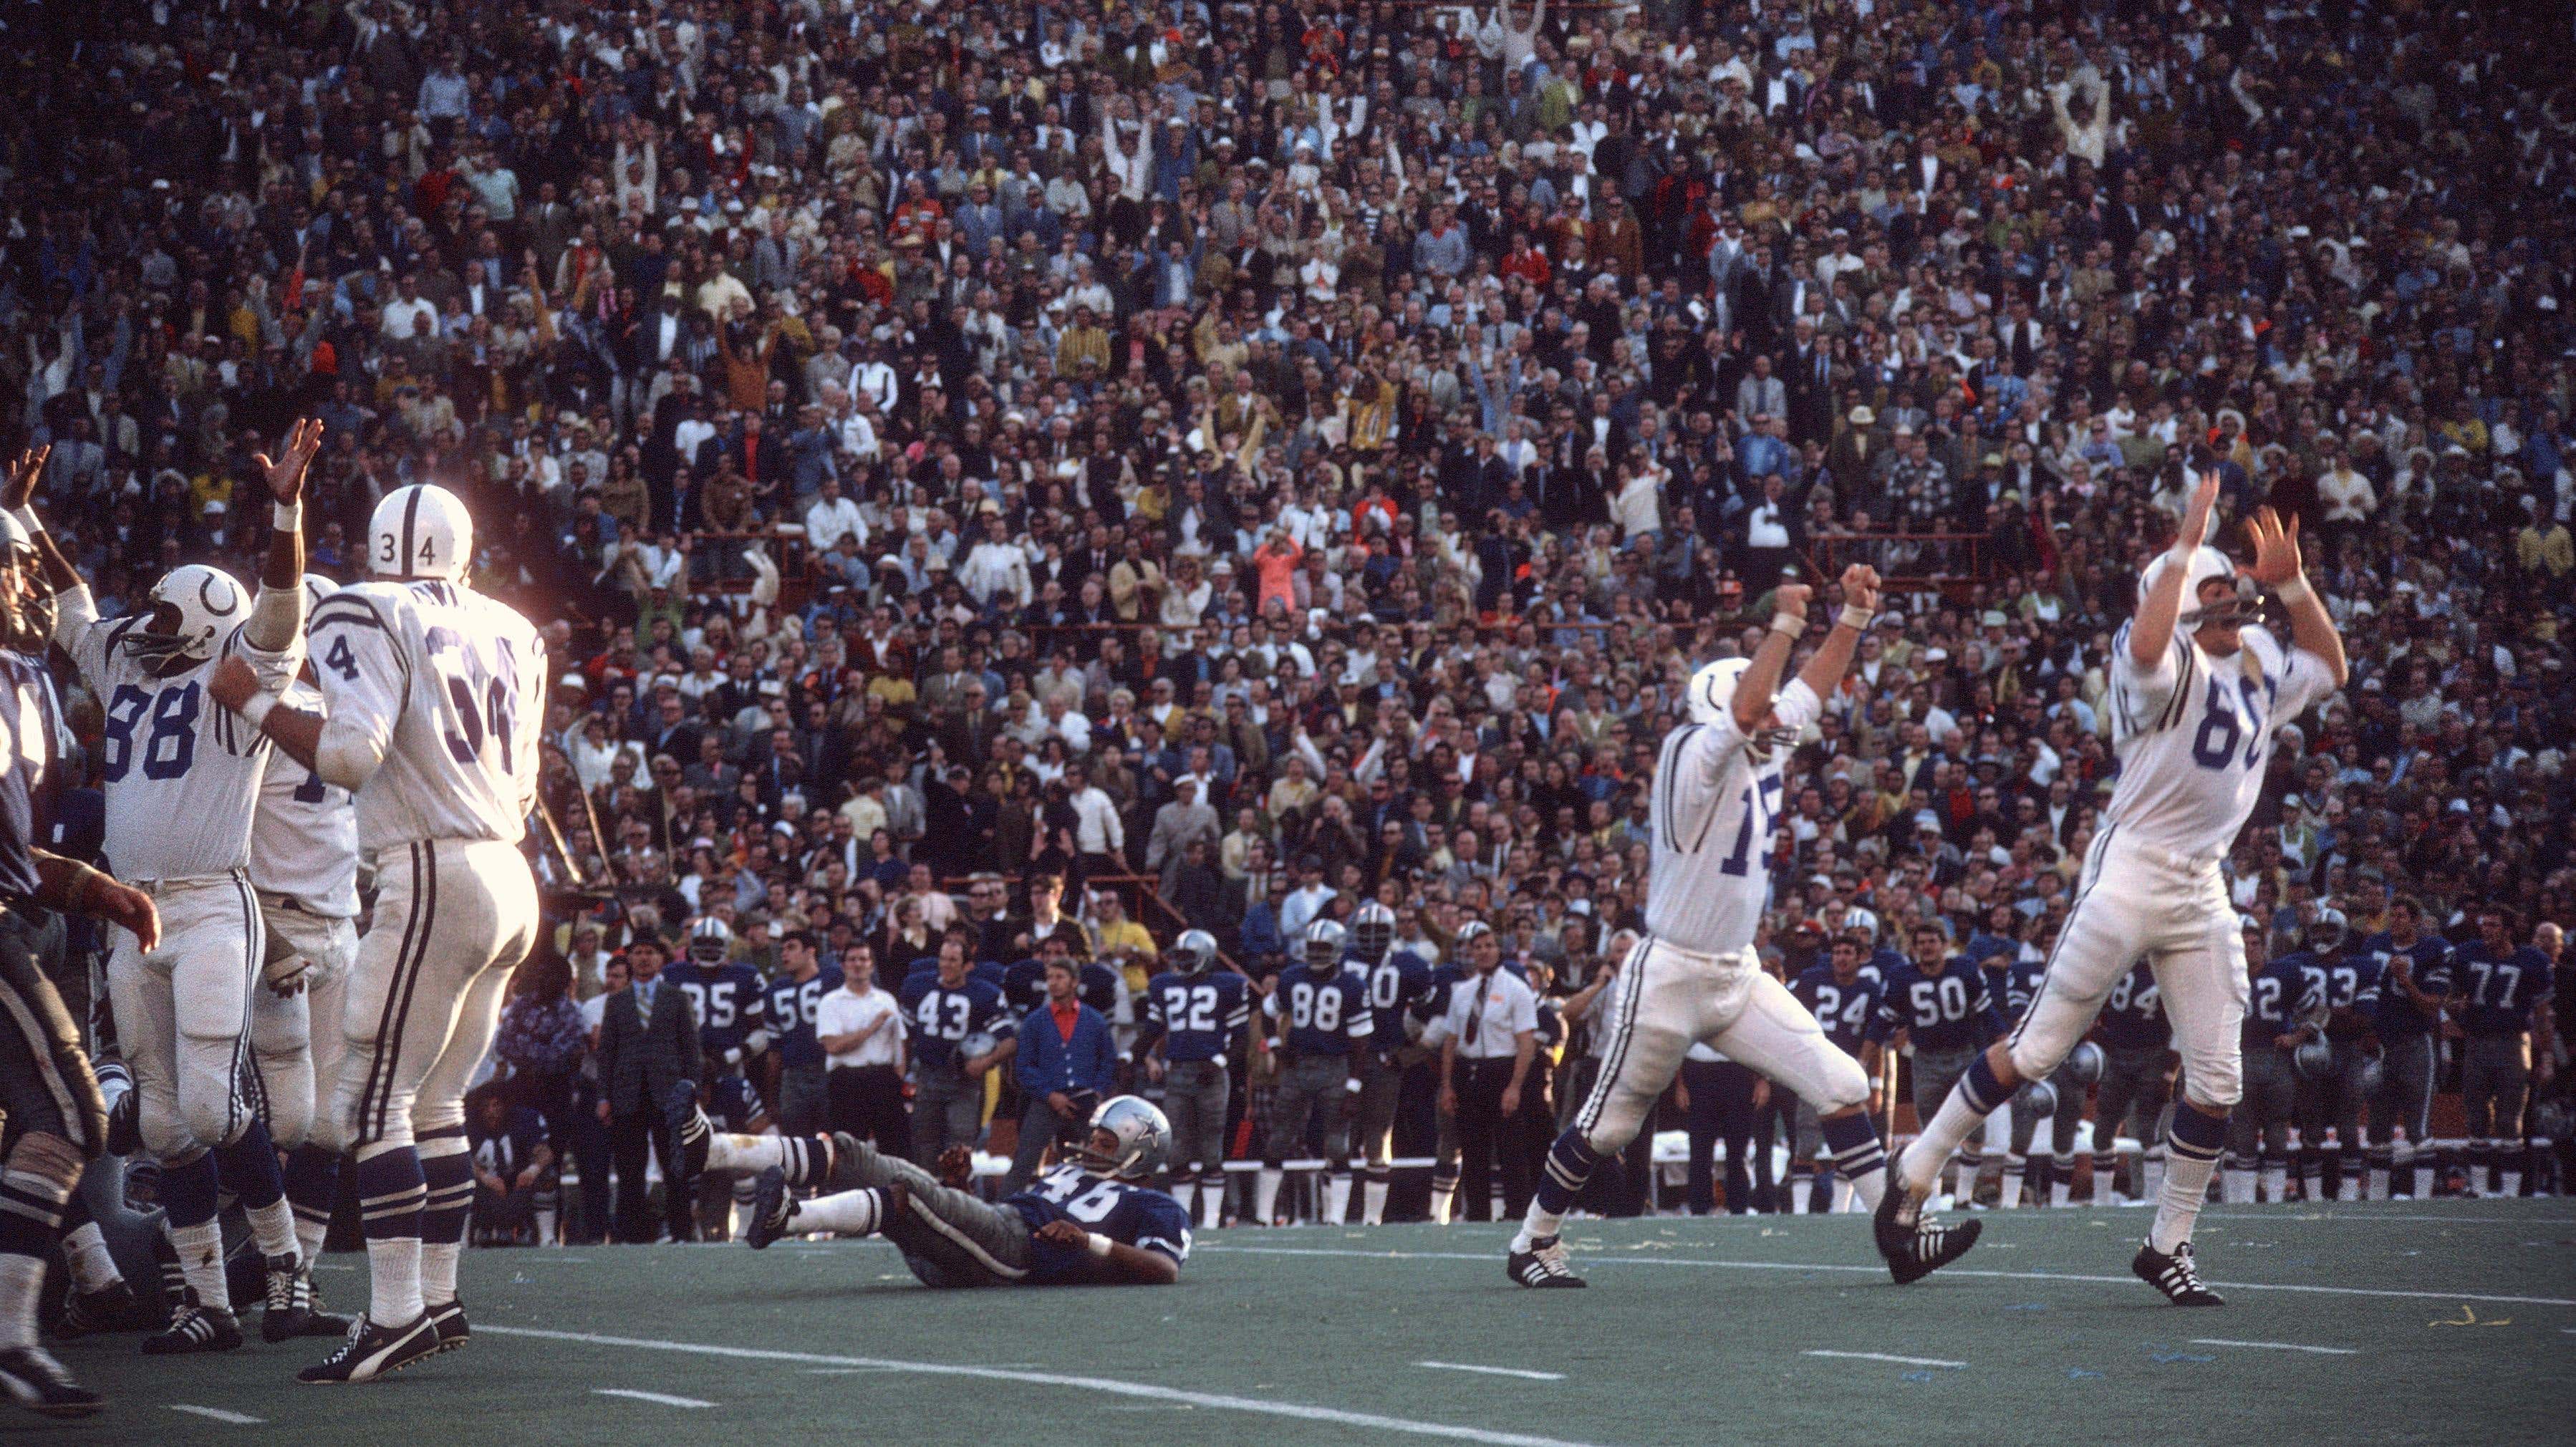 Image for the article titled 10 of the Most Memorable Moments in Super Bowl History